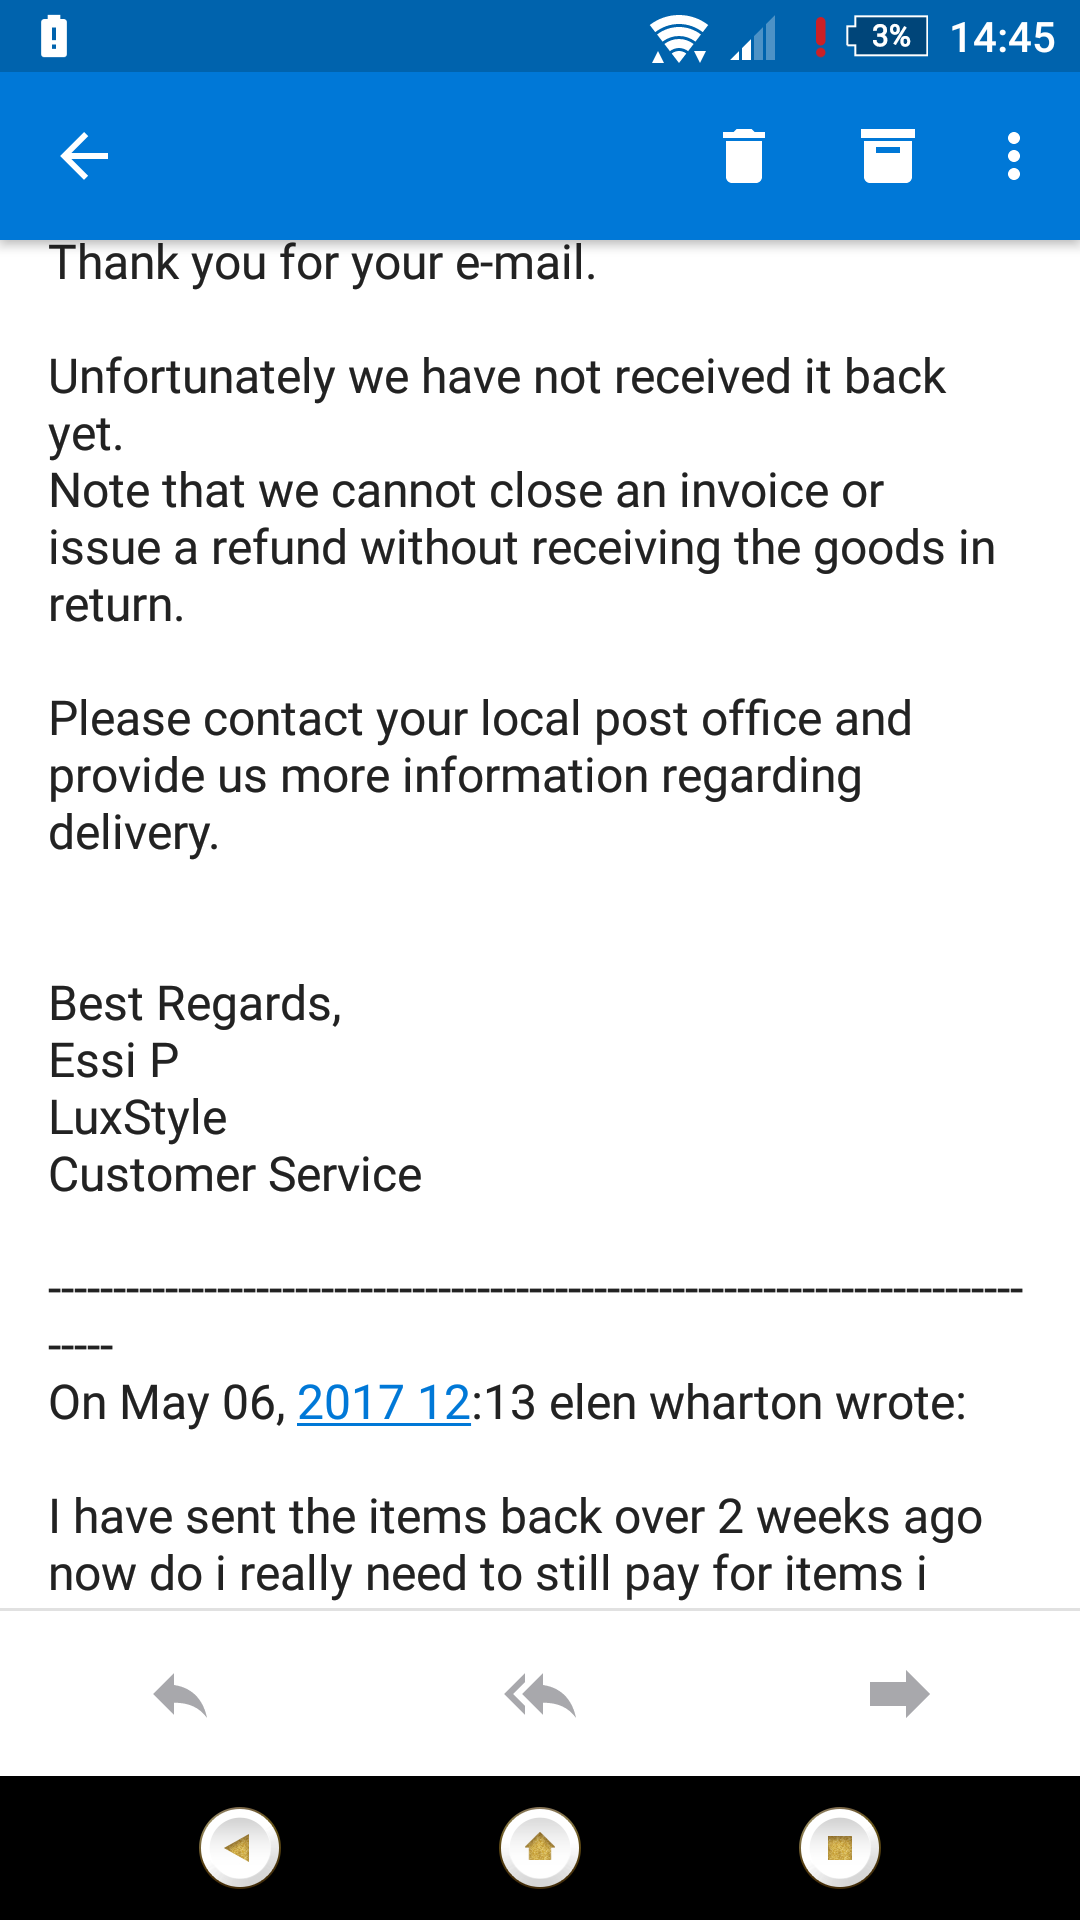 Proof that they deny receiving the products back that i returned 